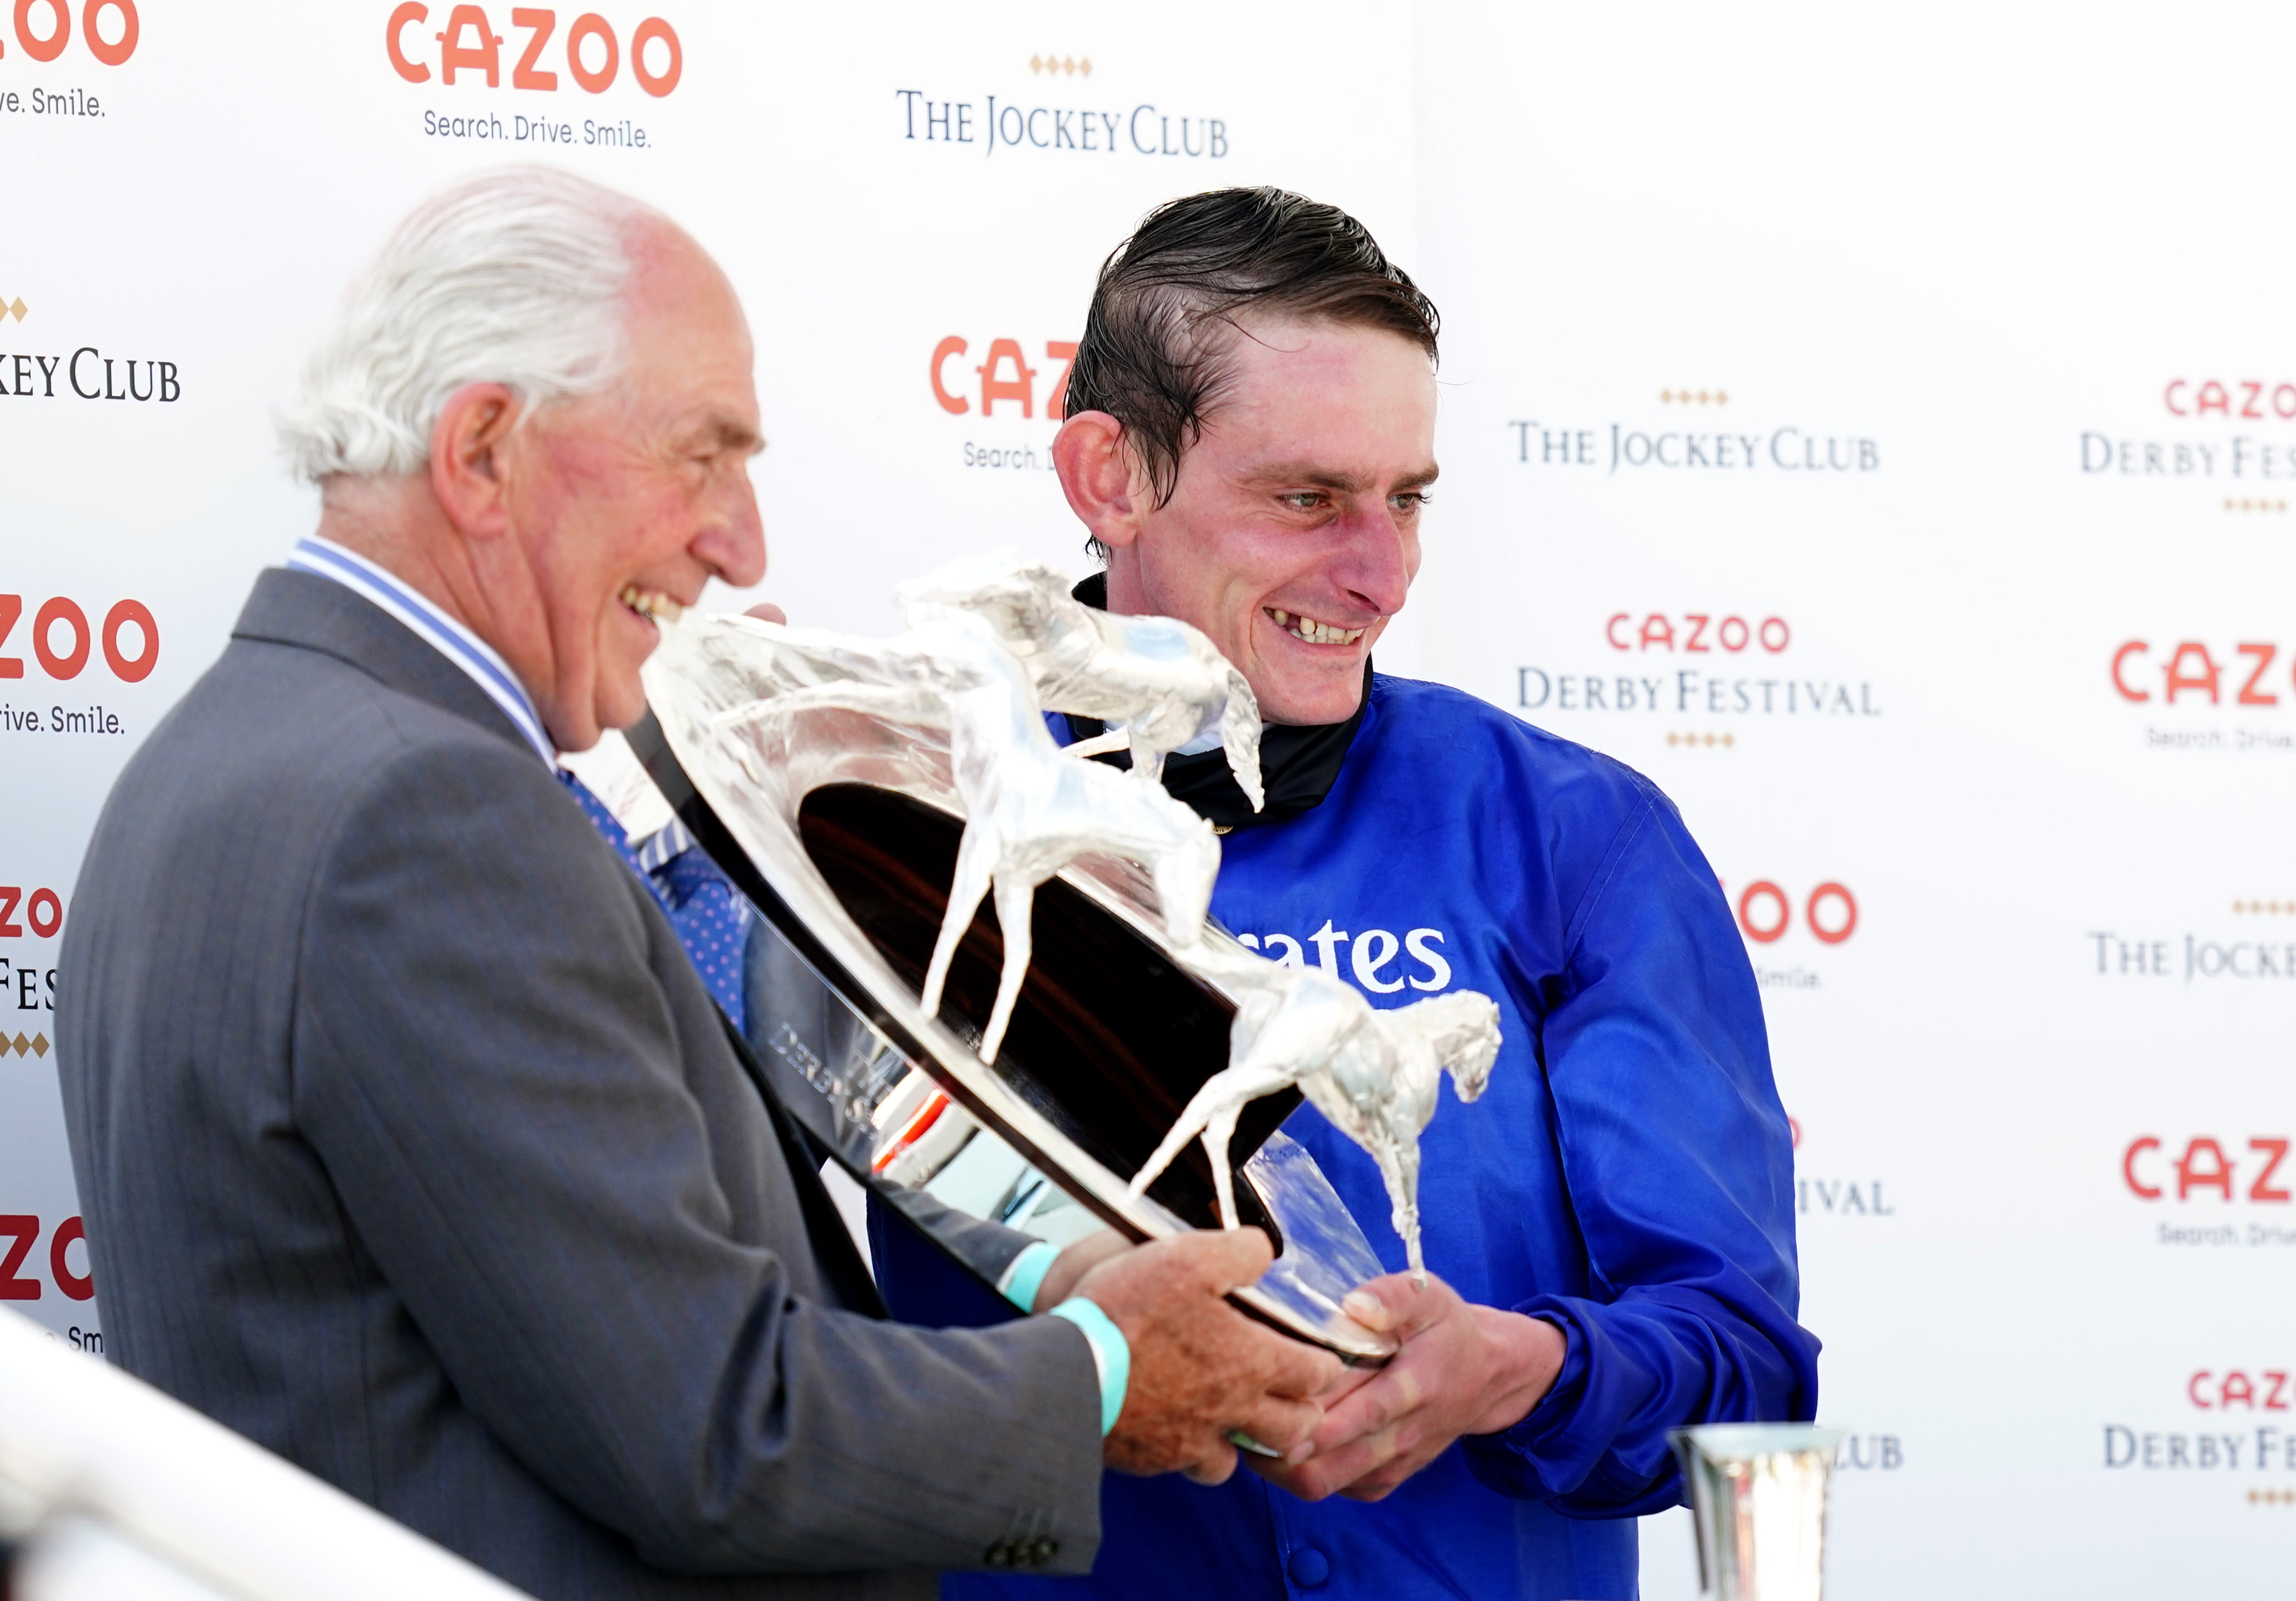 Adam Kirby (right) receiving his trophy after his Derby victory on Adayar